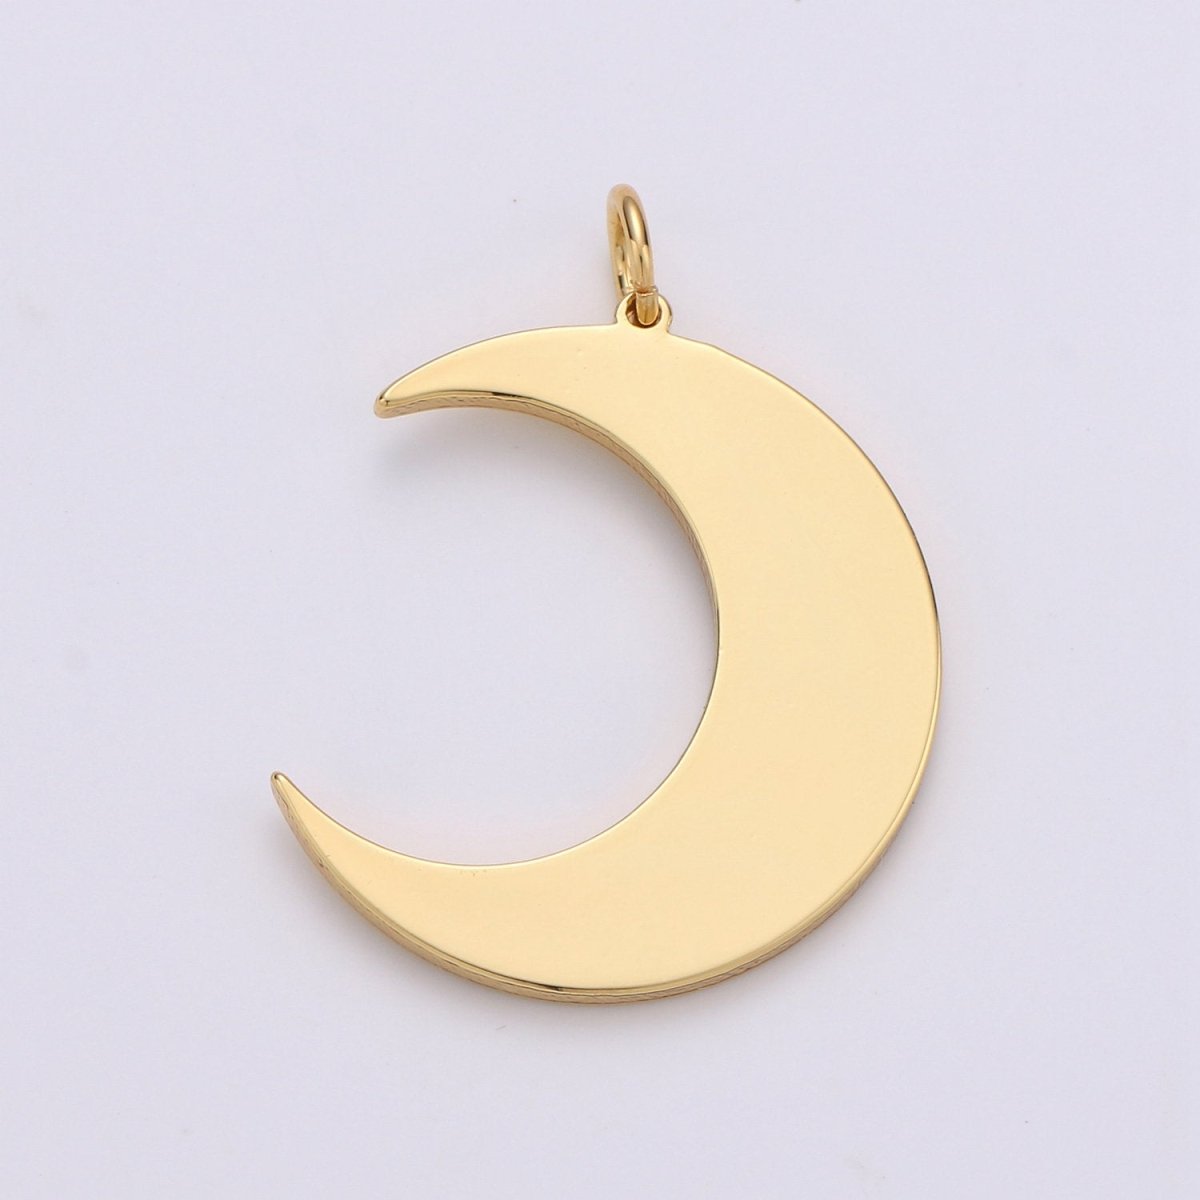 Dainty 14k Gold Filled Moon charm - Gold Moon pendant - Crescent Moon pendant for Necklace Bracelet Earring Charm Supply Celestial Jewelry D-479 - DLUXCA